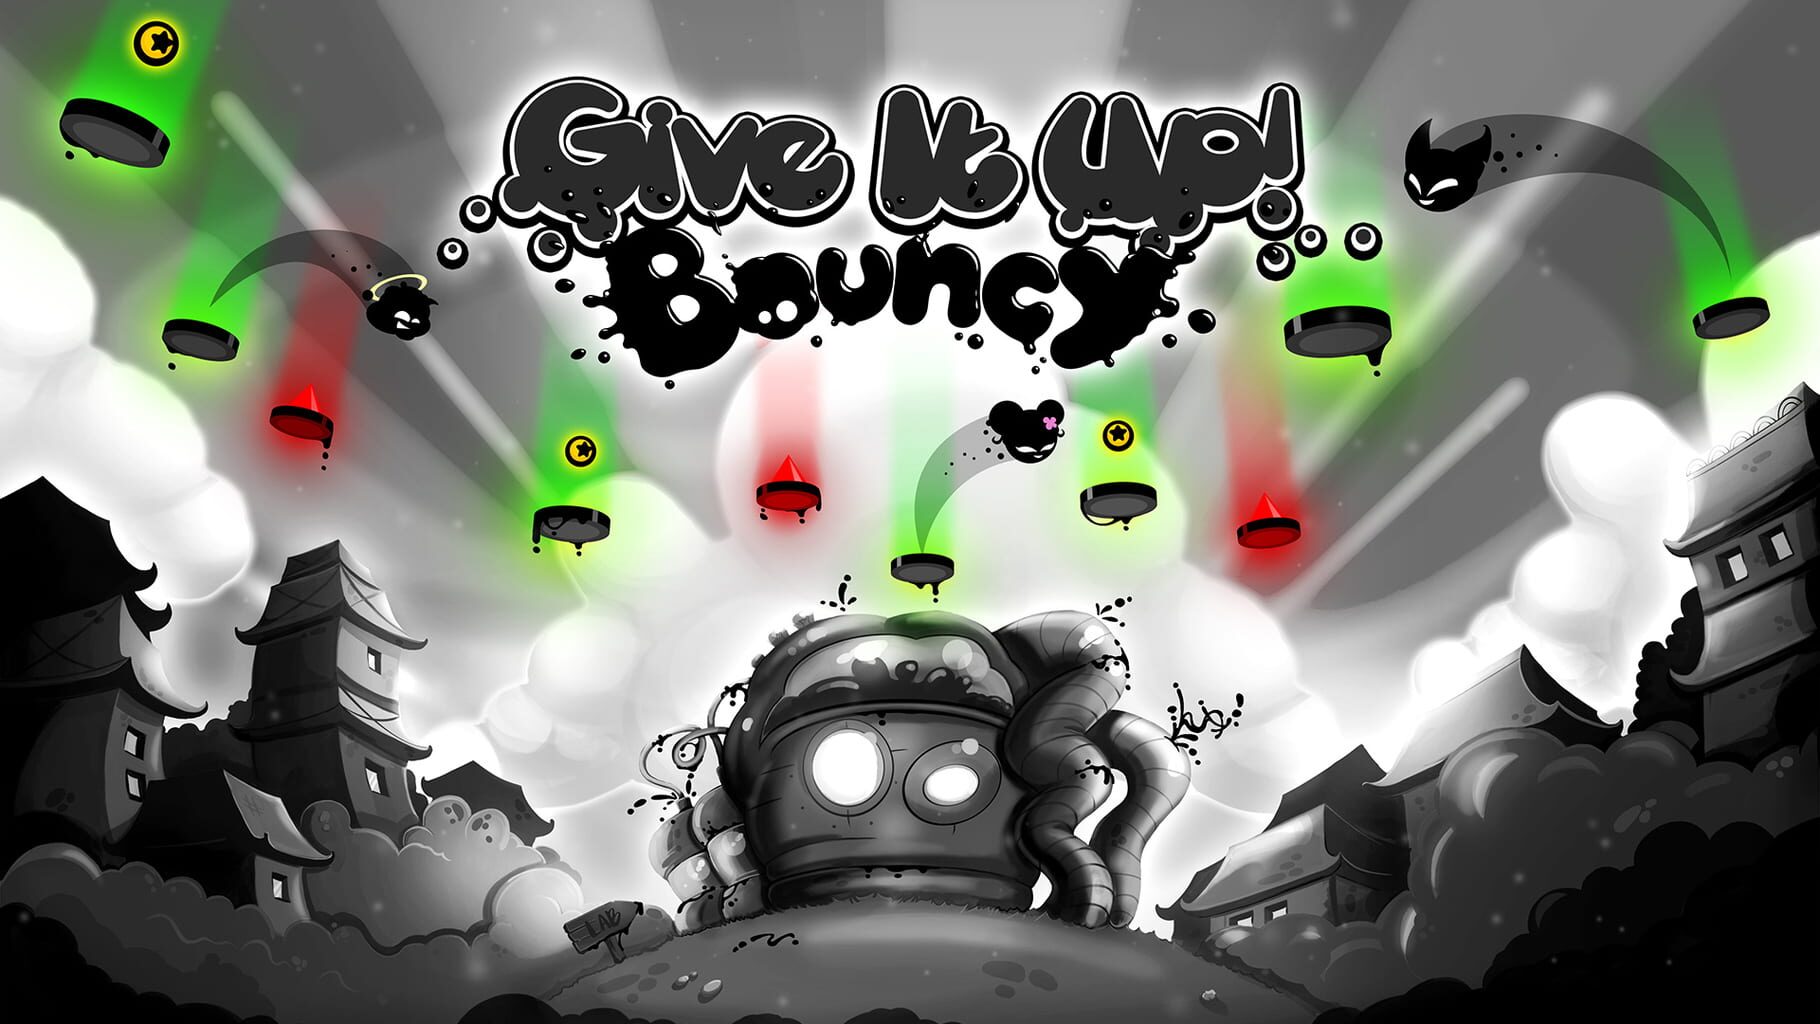 Give It Up! Bouncy artwork